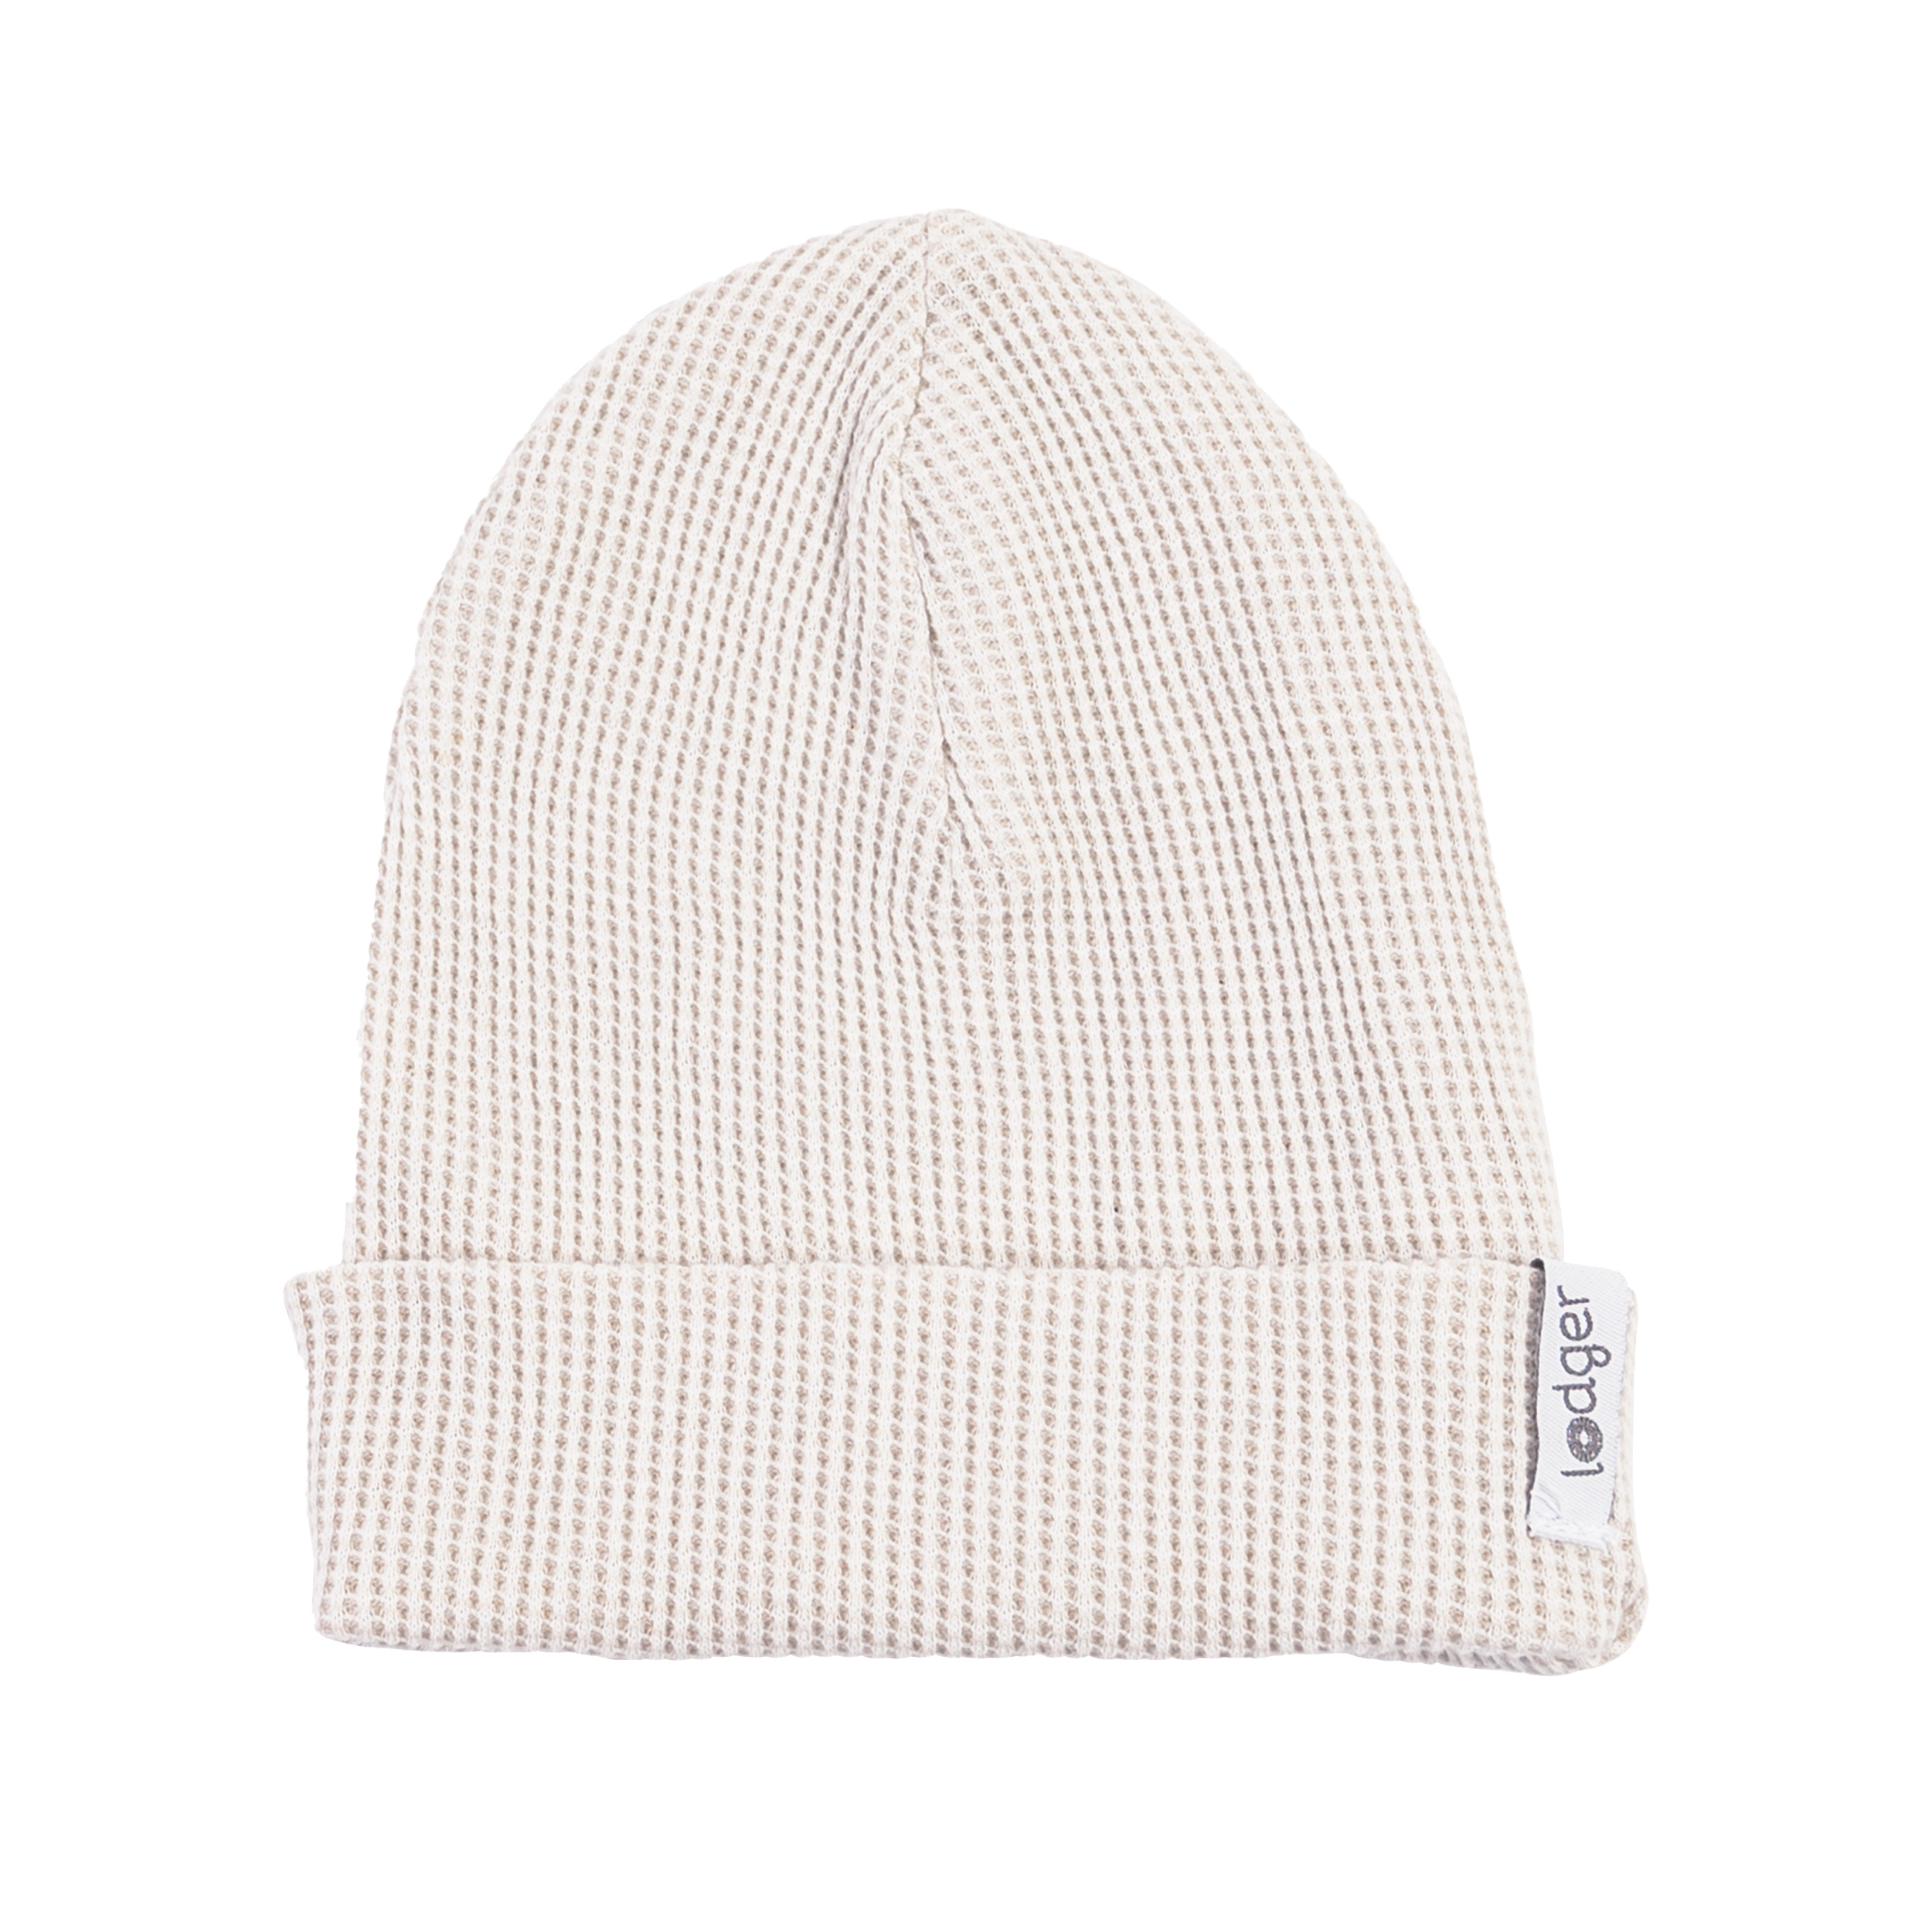 Beanie soft and breathable cotton baby beanie